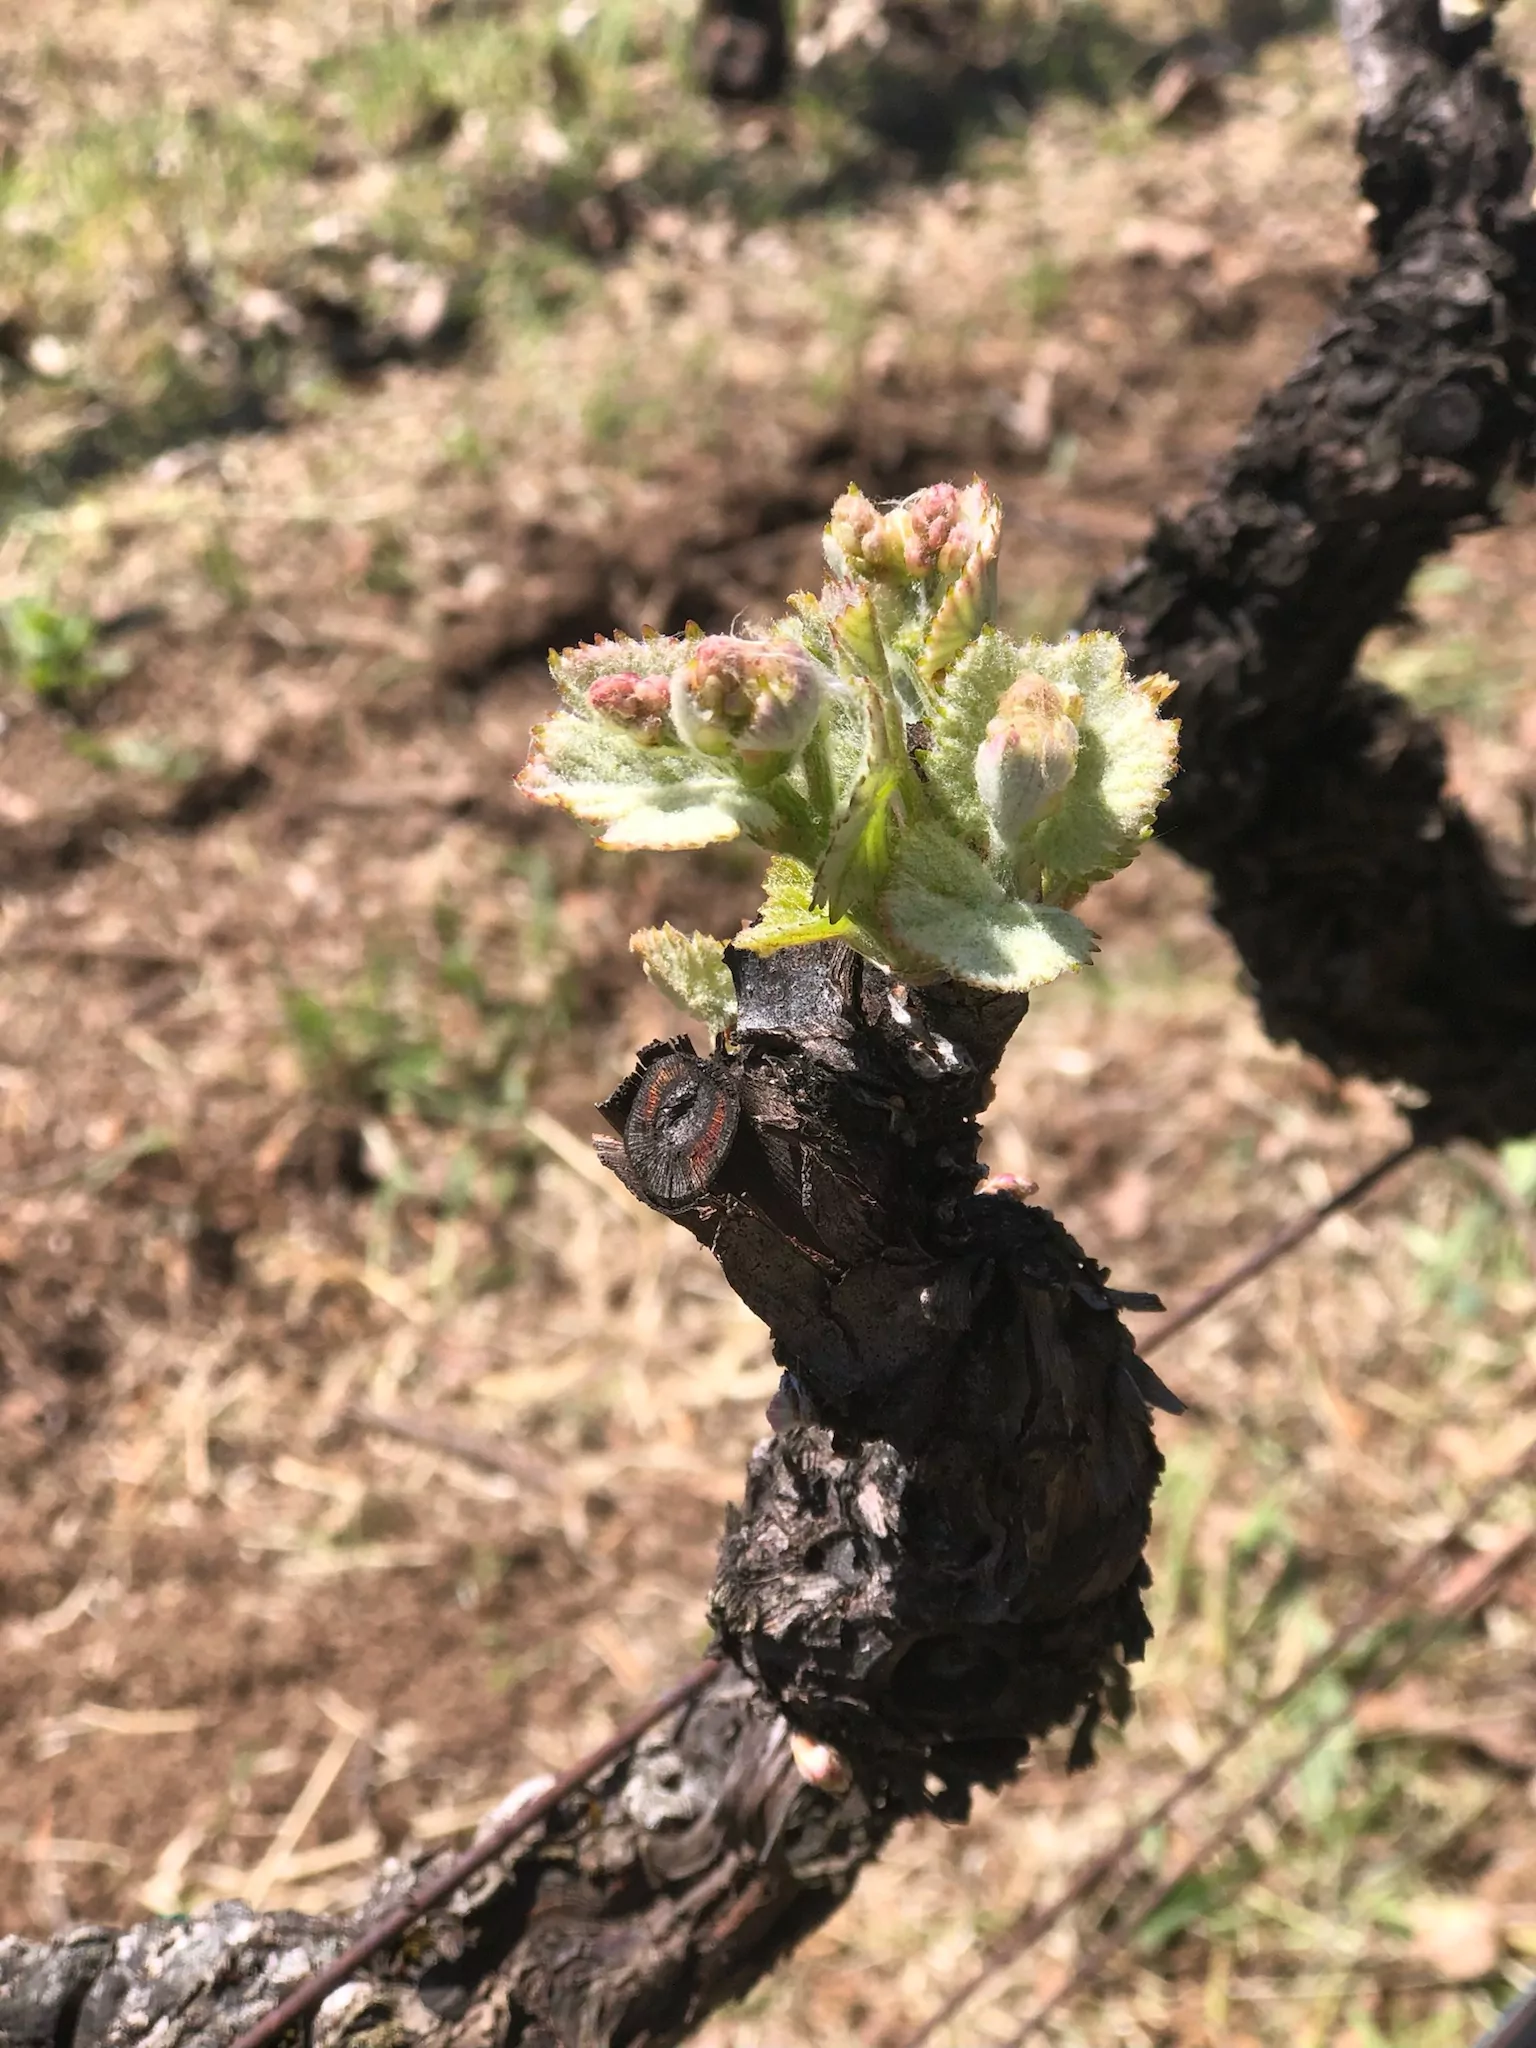 Spring 2023 – In the Vineyards and Winery